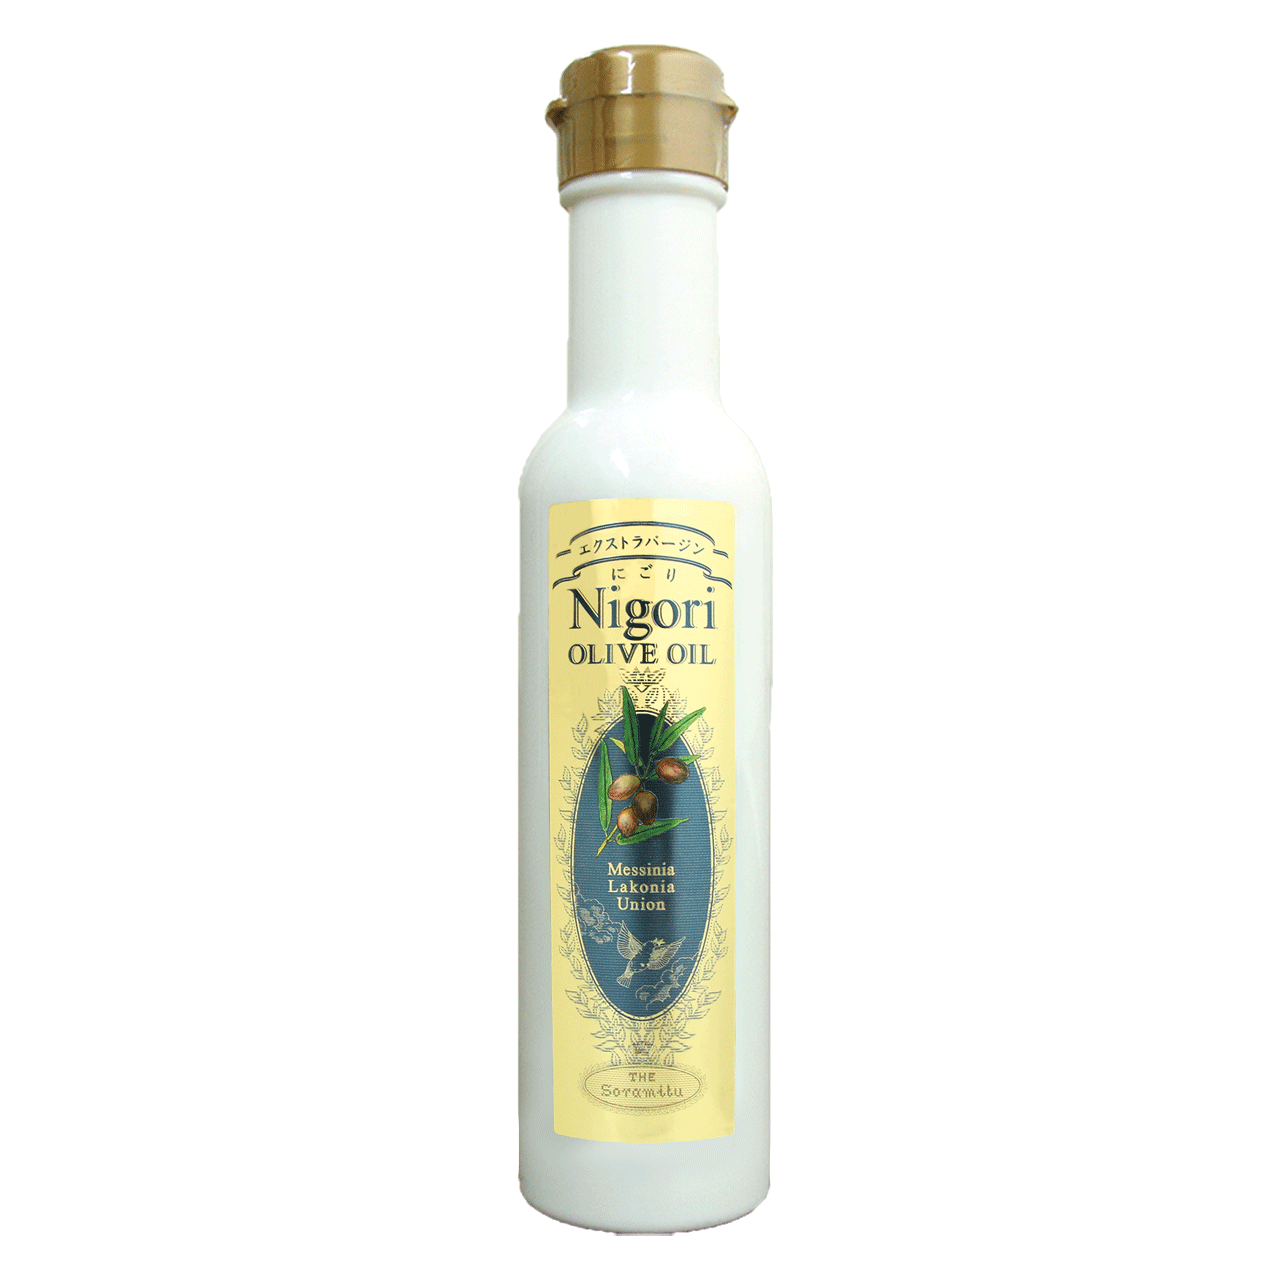 Nigori olive oil - freshly squeezed and unfiltered extra virgin olive oil